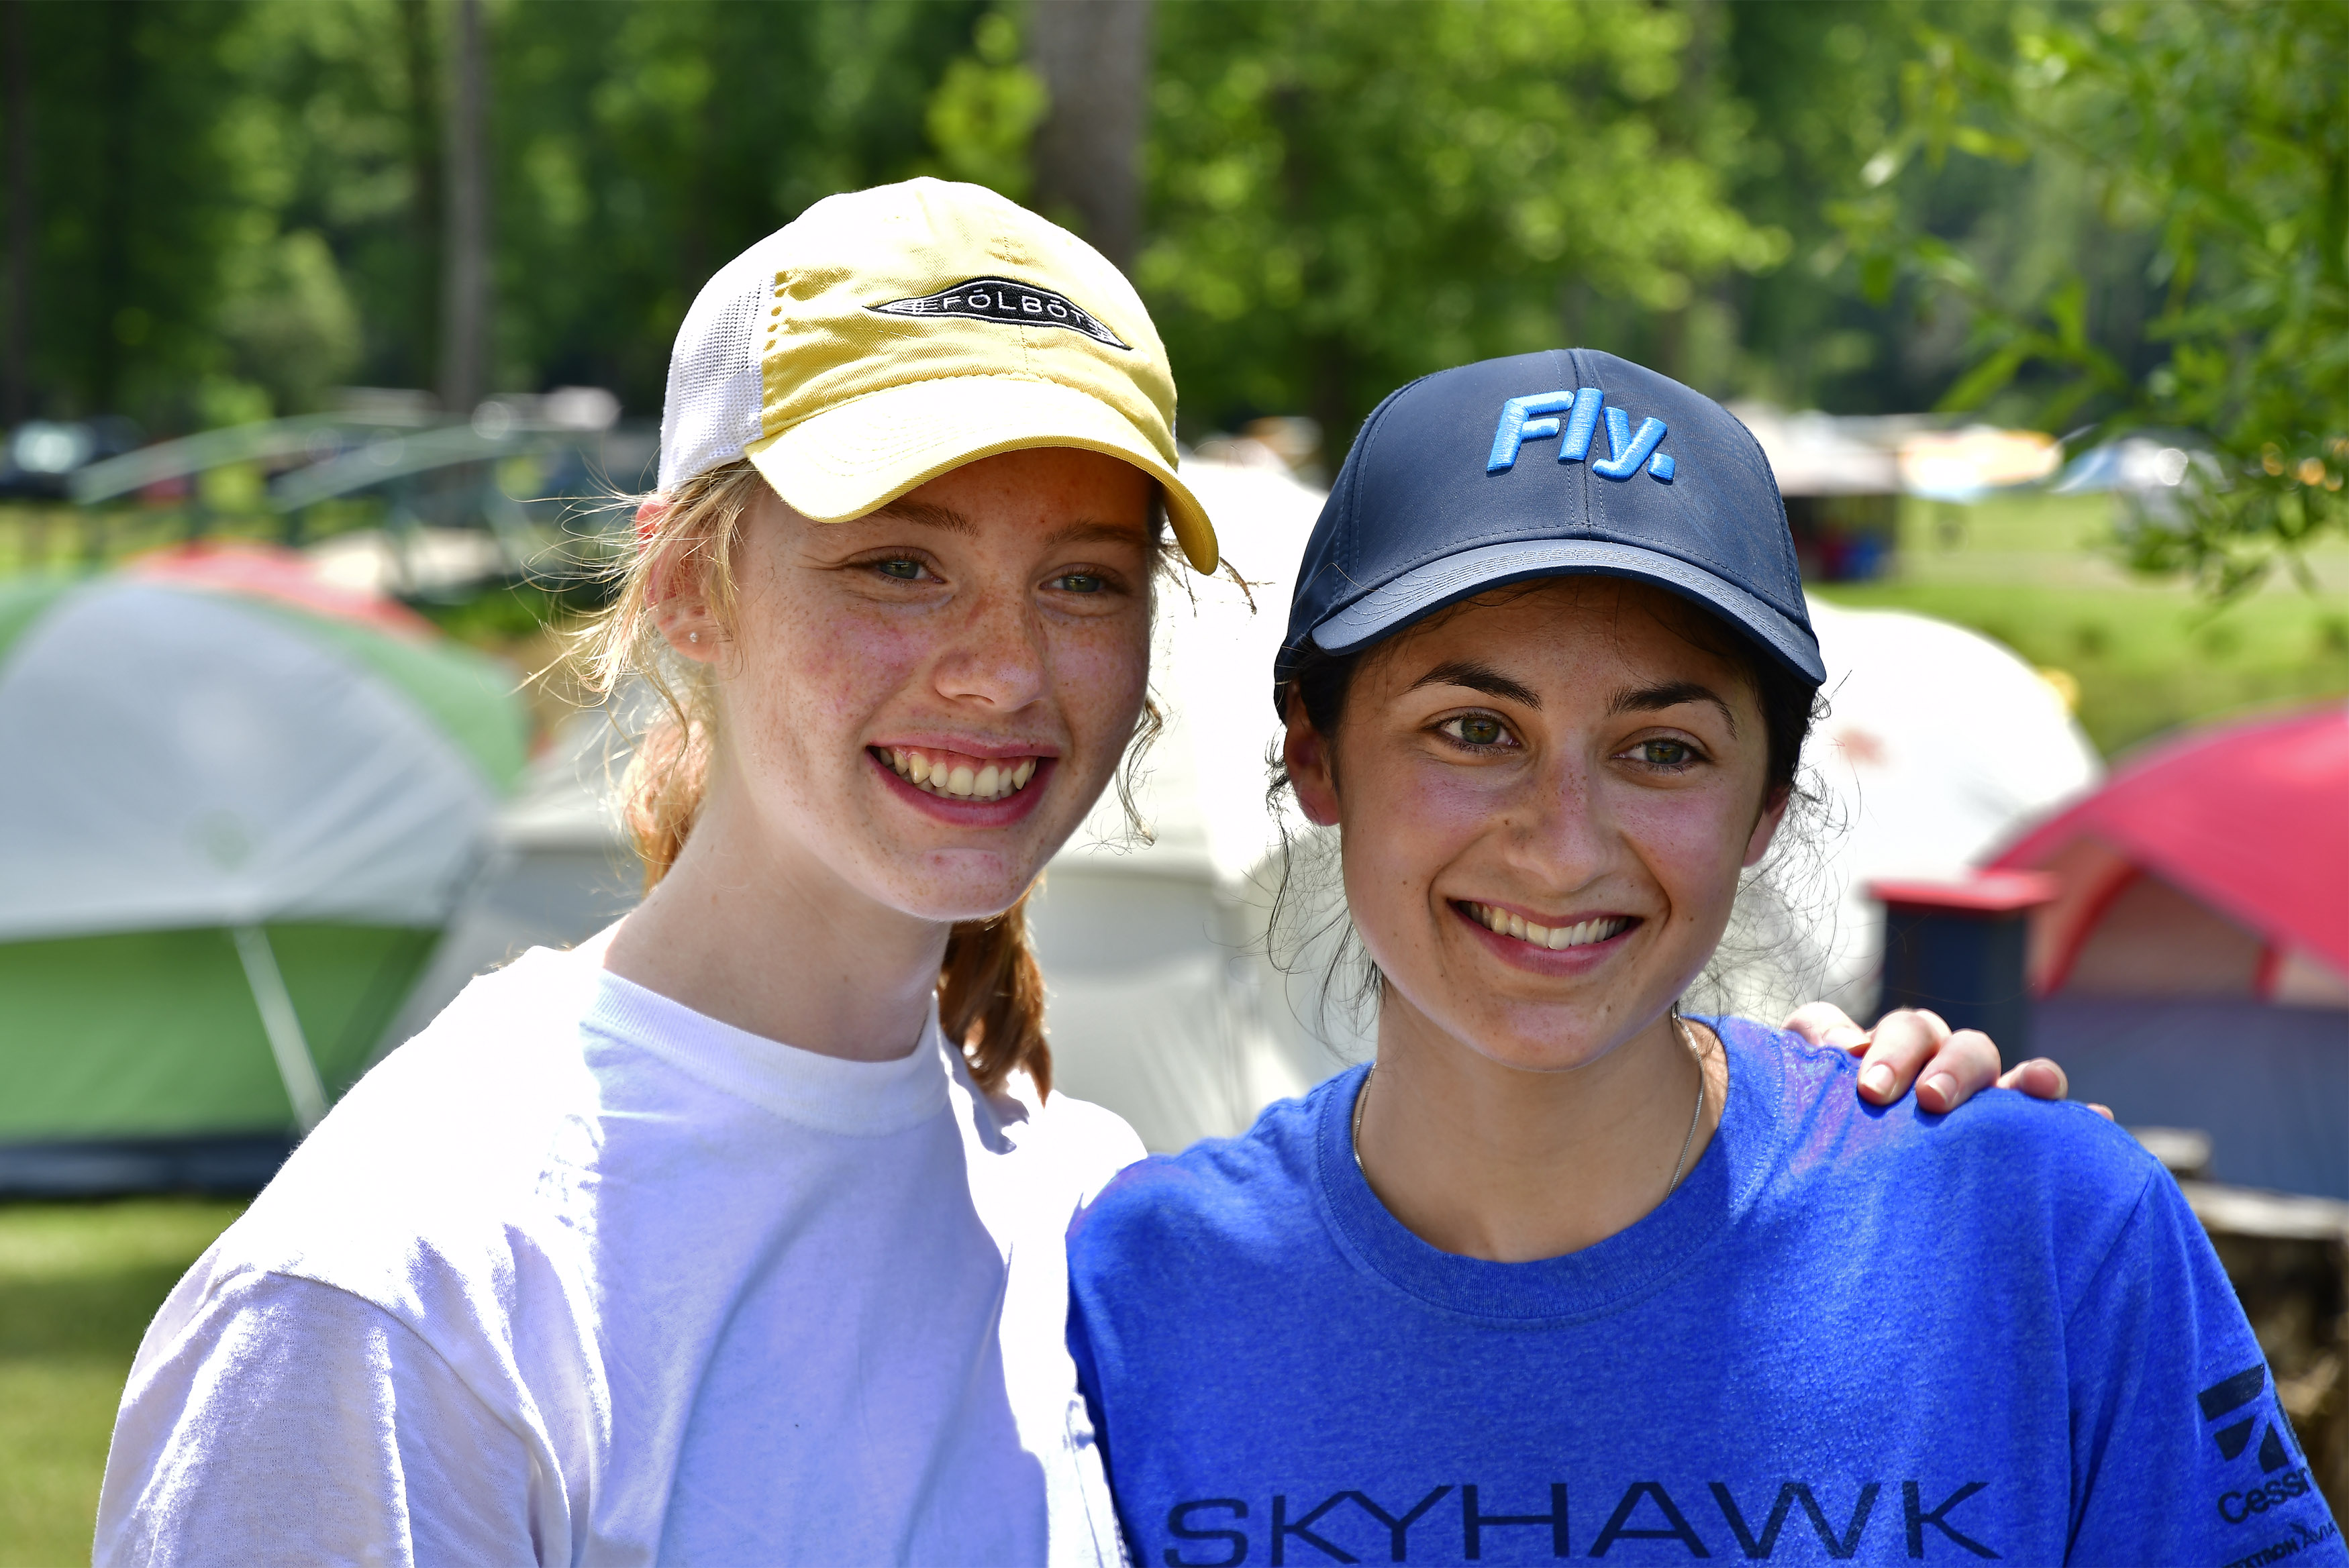 Rachel Enggasser and Malena Modirzadeh volunteered during the Young Aviators Fly-In at Triple Tree Aerodrome in Woodruff, South Carolina, June 8 to 10. Photo by David Tulis.